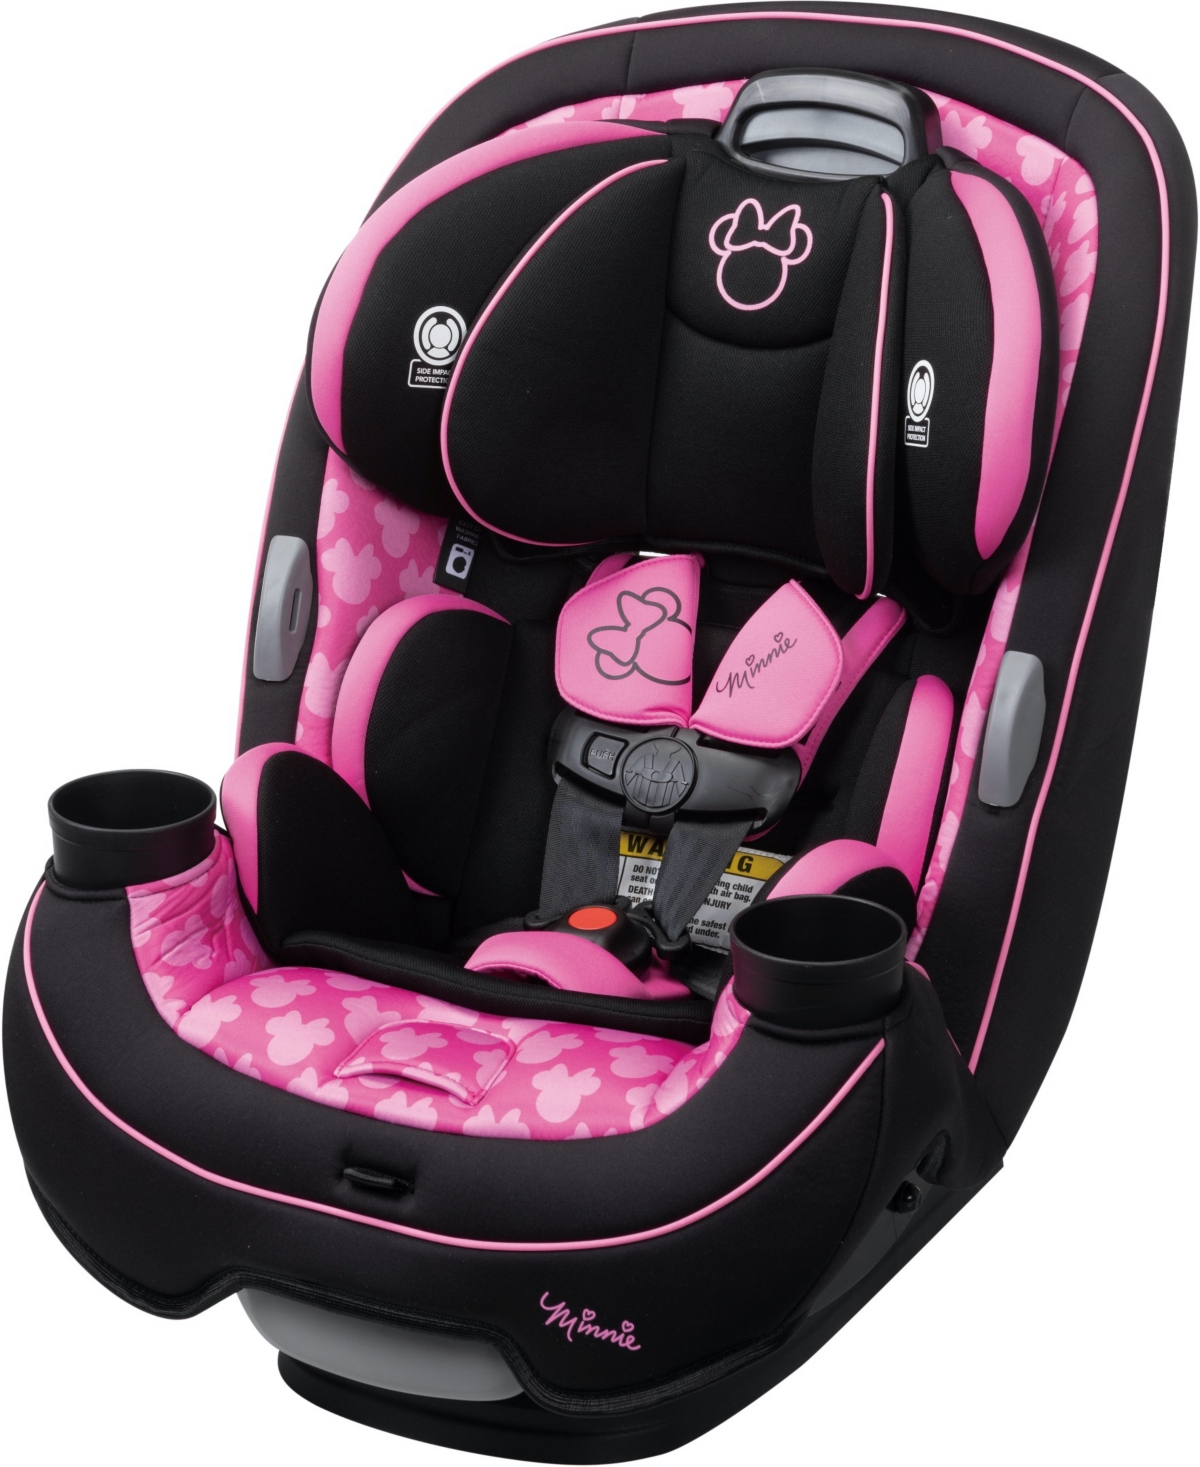 Disney Baby Grow And Go 3-in-1 Convertible One-hand Adjust Car Seat In Simply Minnie